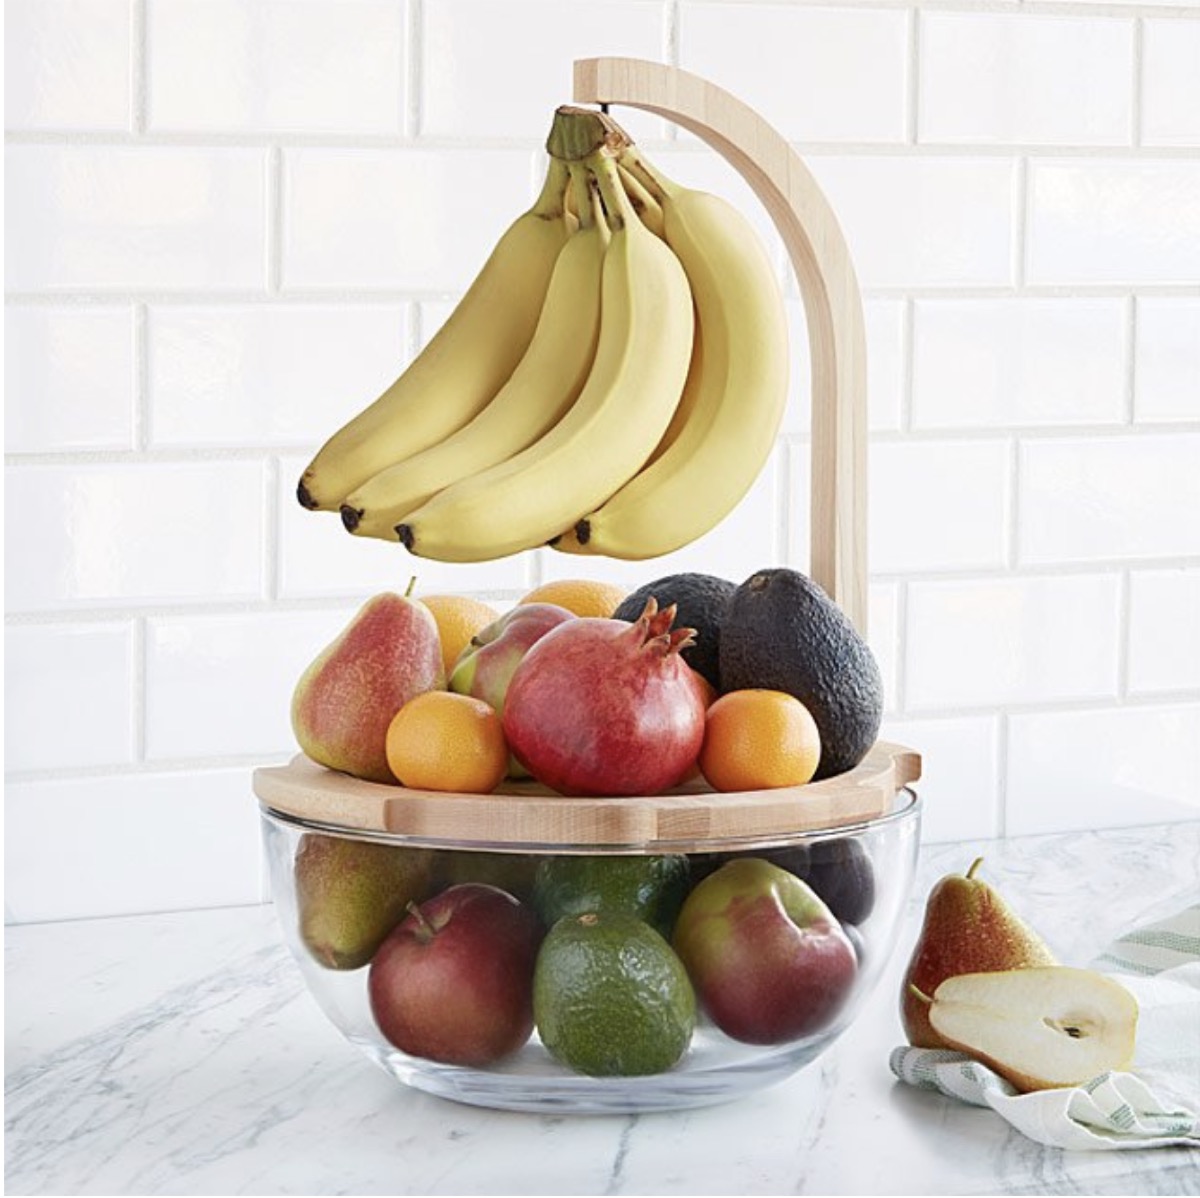 bowl of fruit with wooden lid and hanging bunch of bananas